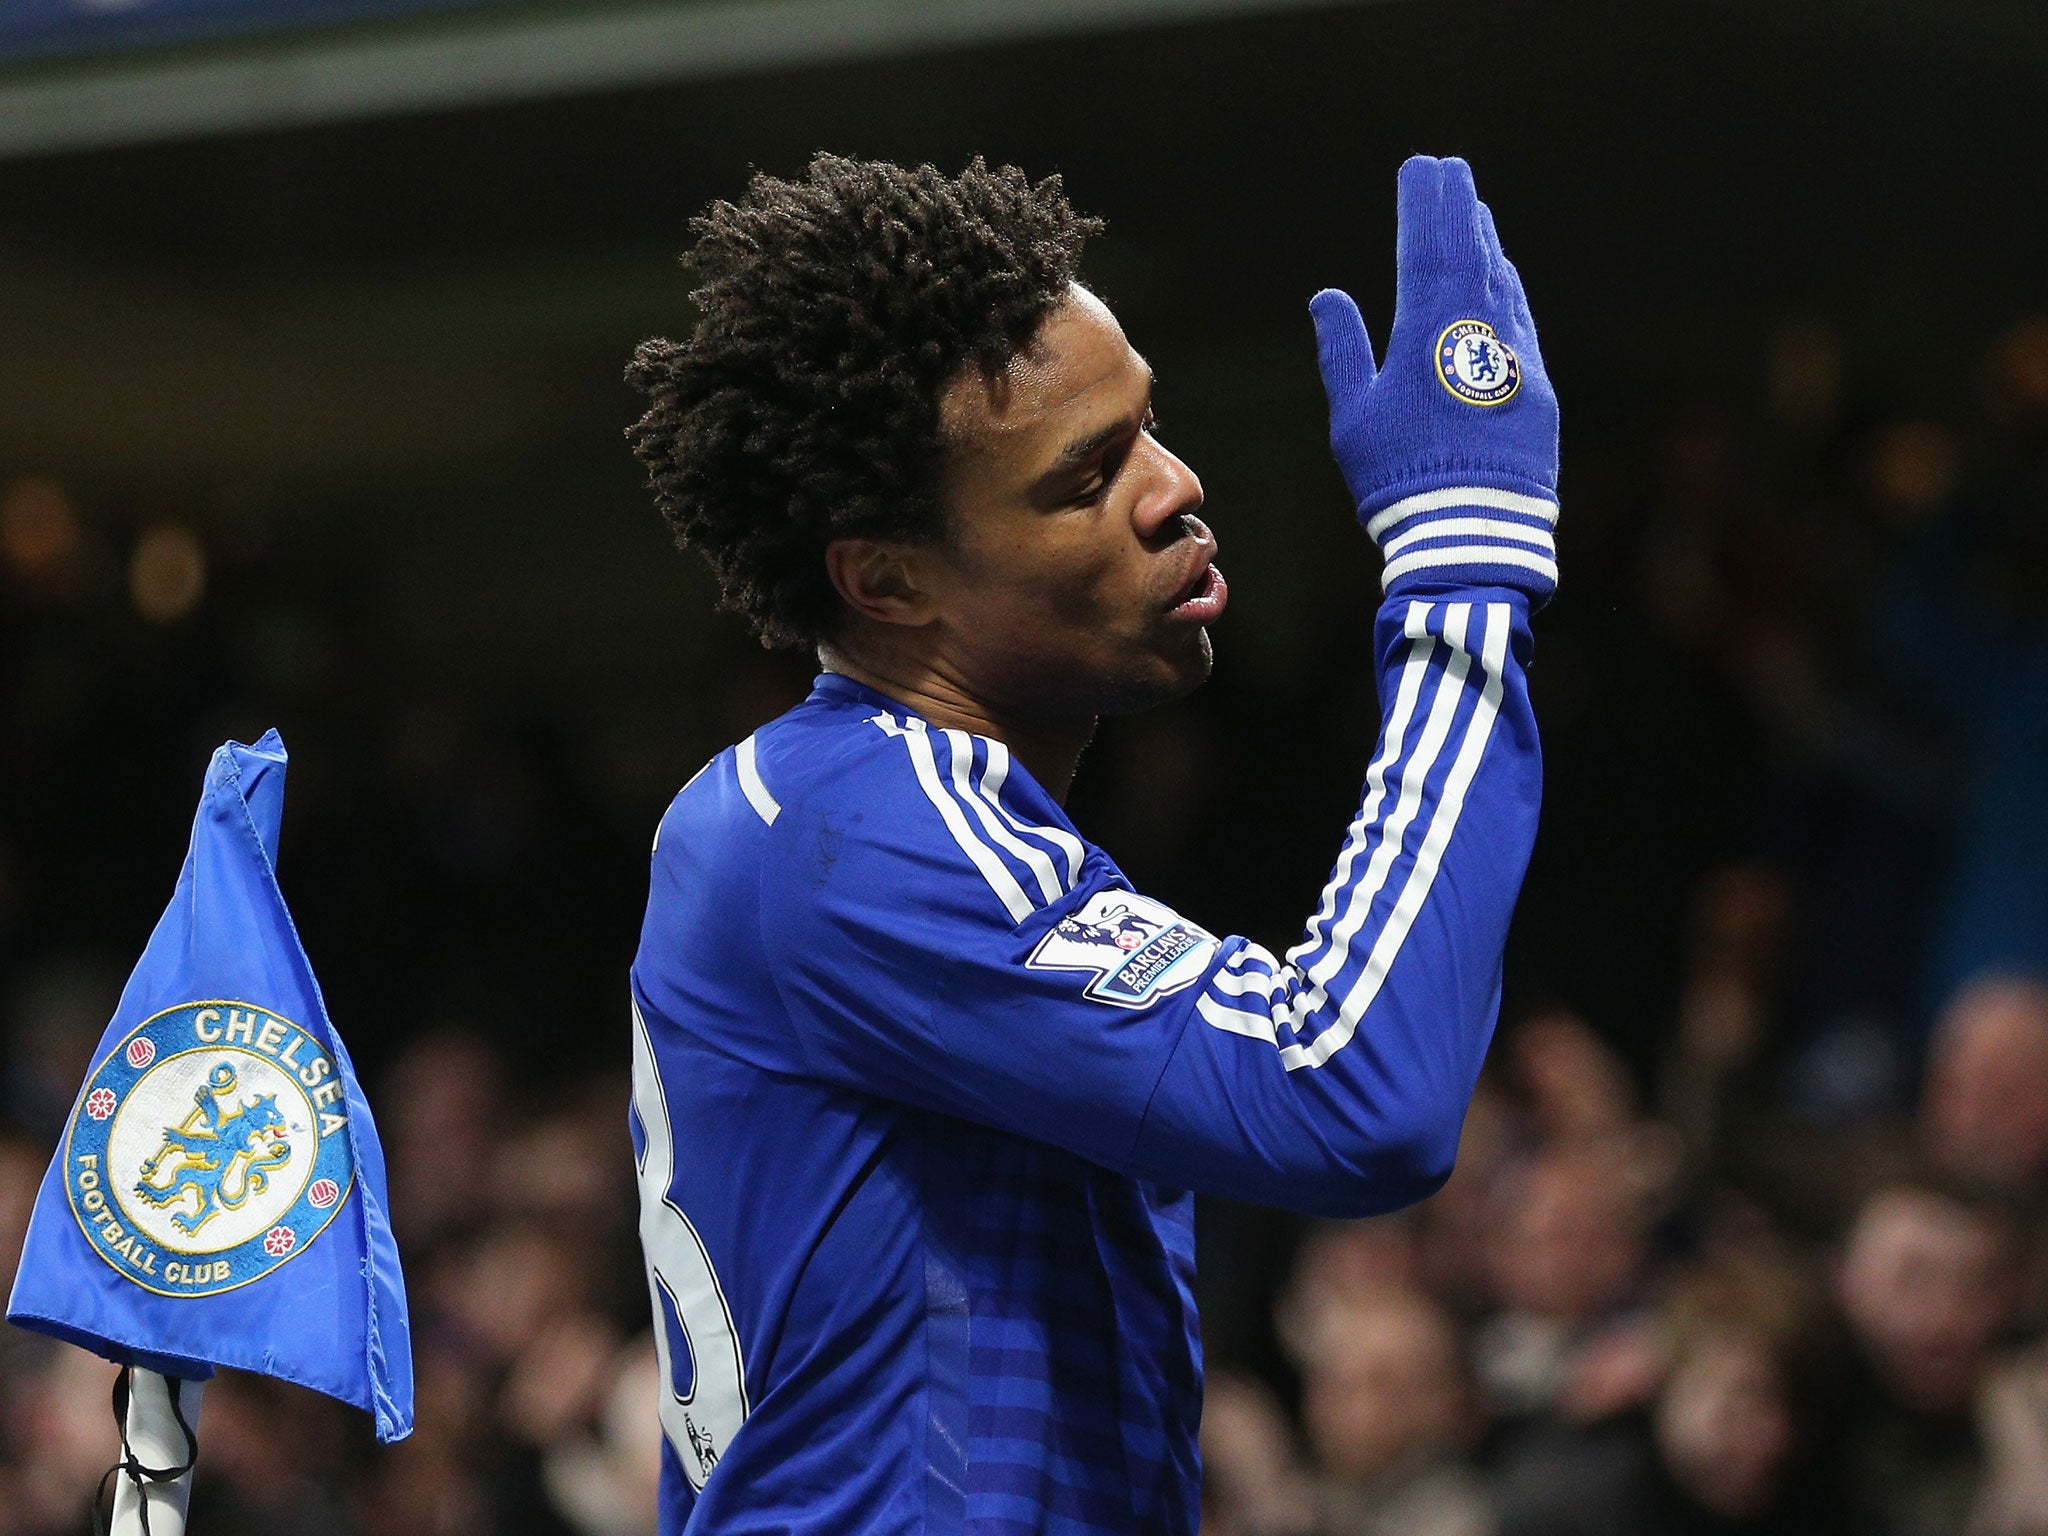 French international Loic Remy looks set to join high flying Leicester City